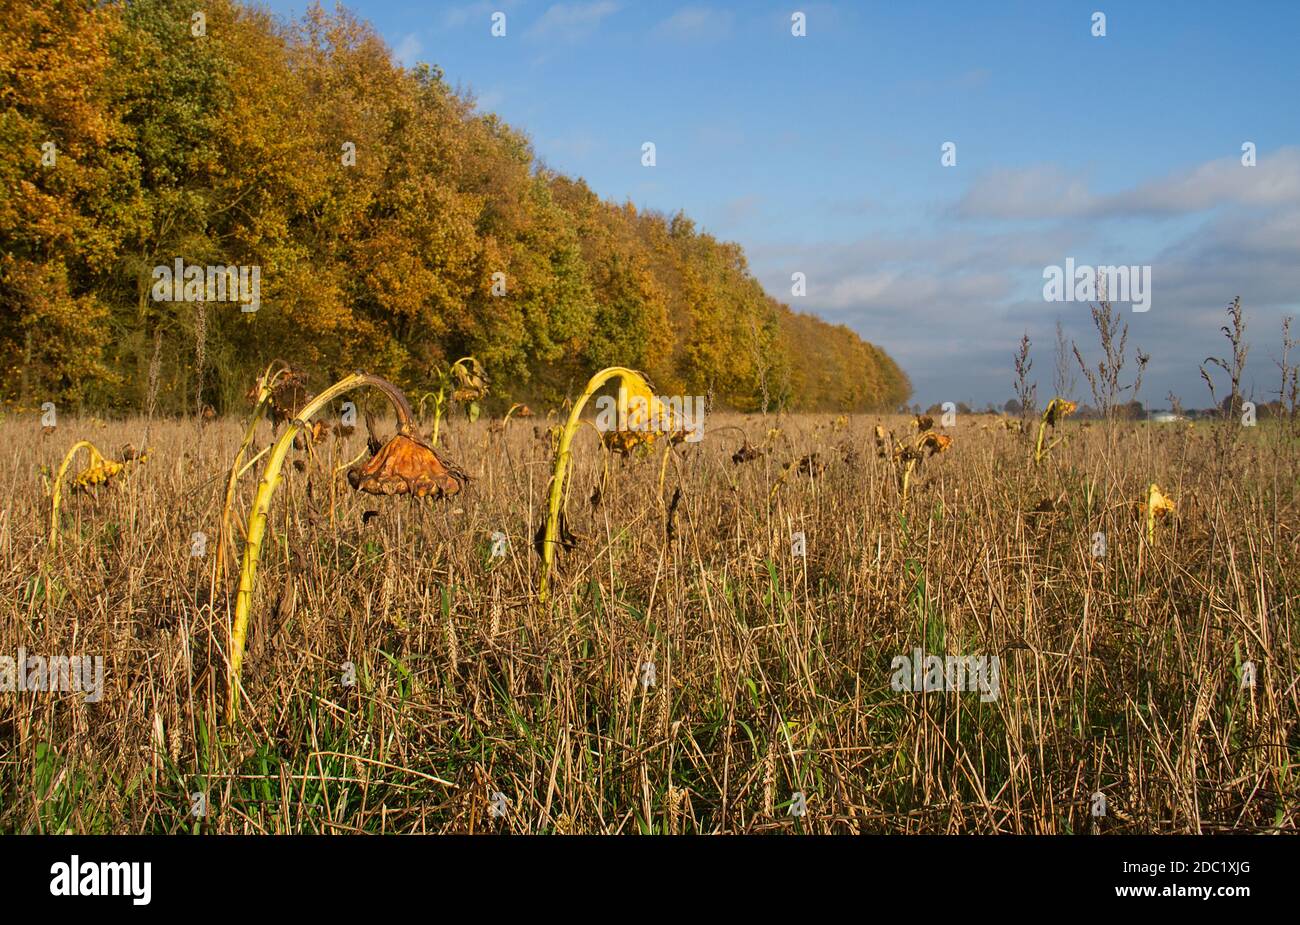 Wheatfield with withered Sunflowers in autumn Stock Photo